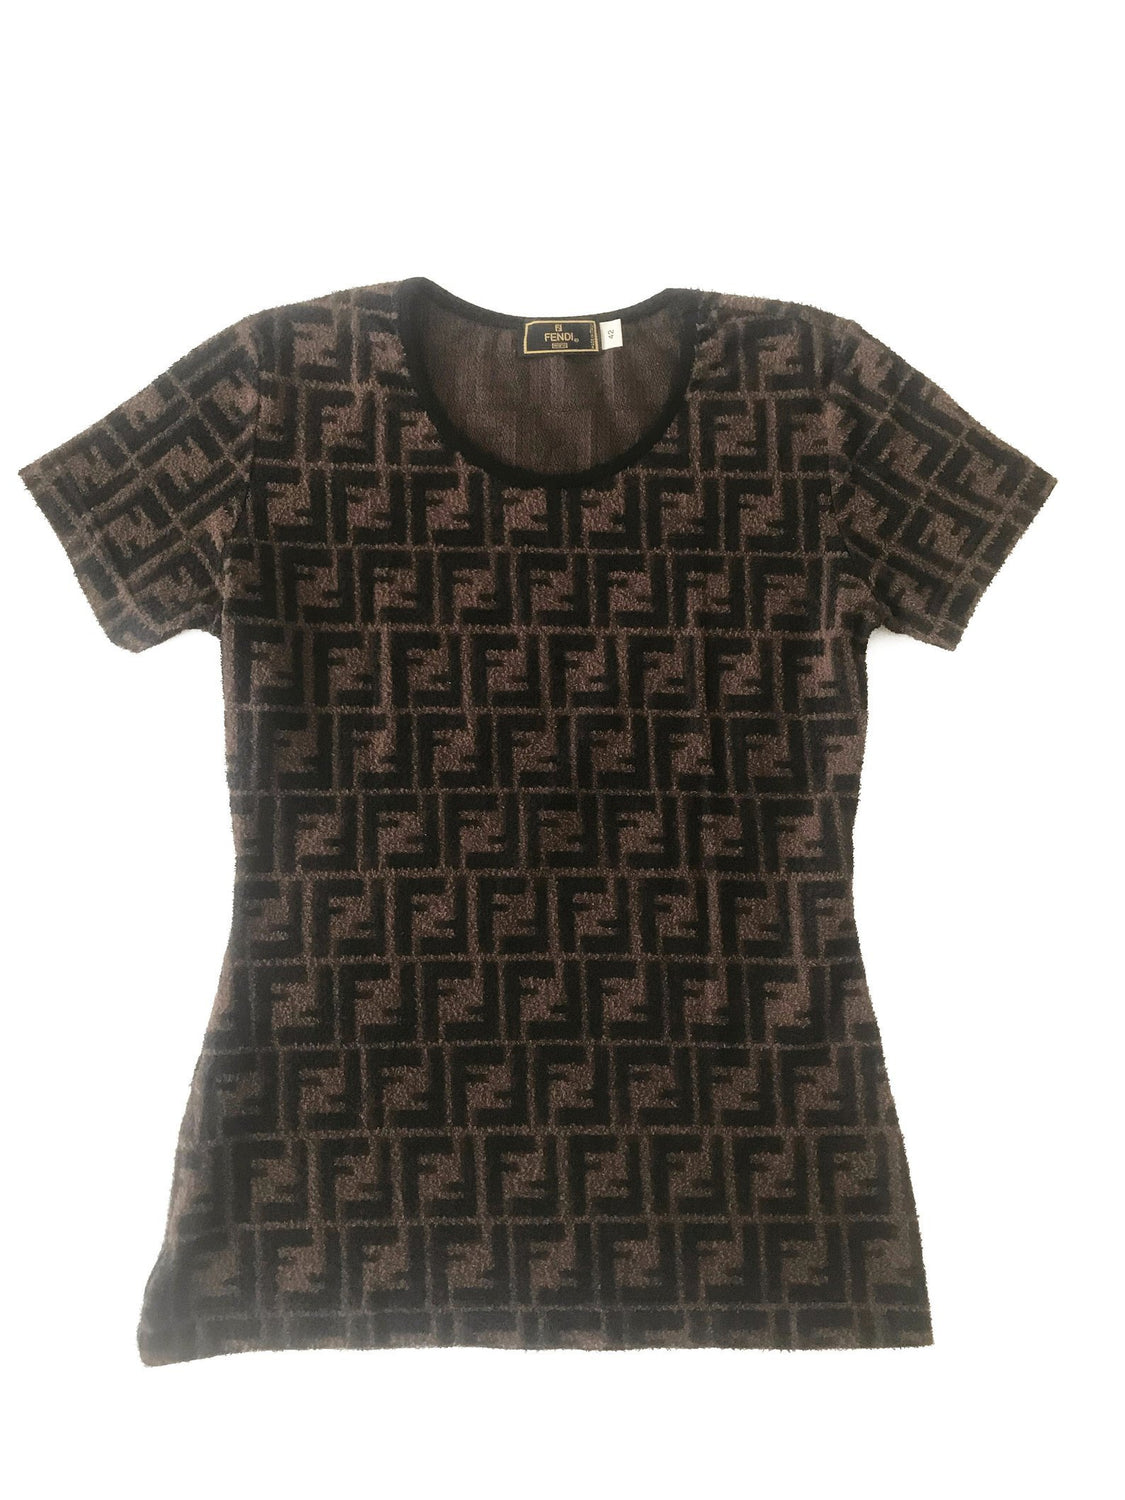 FRUIT Vintage  Fendi Zucca print logo monogram t-shirt dating to the 90s, made from the cutest terry towelling fabric